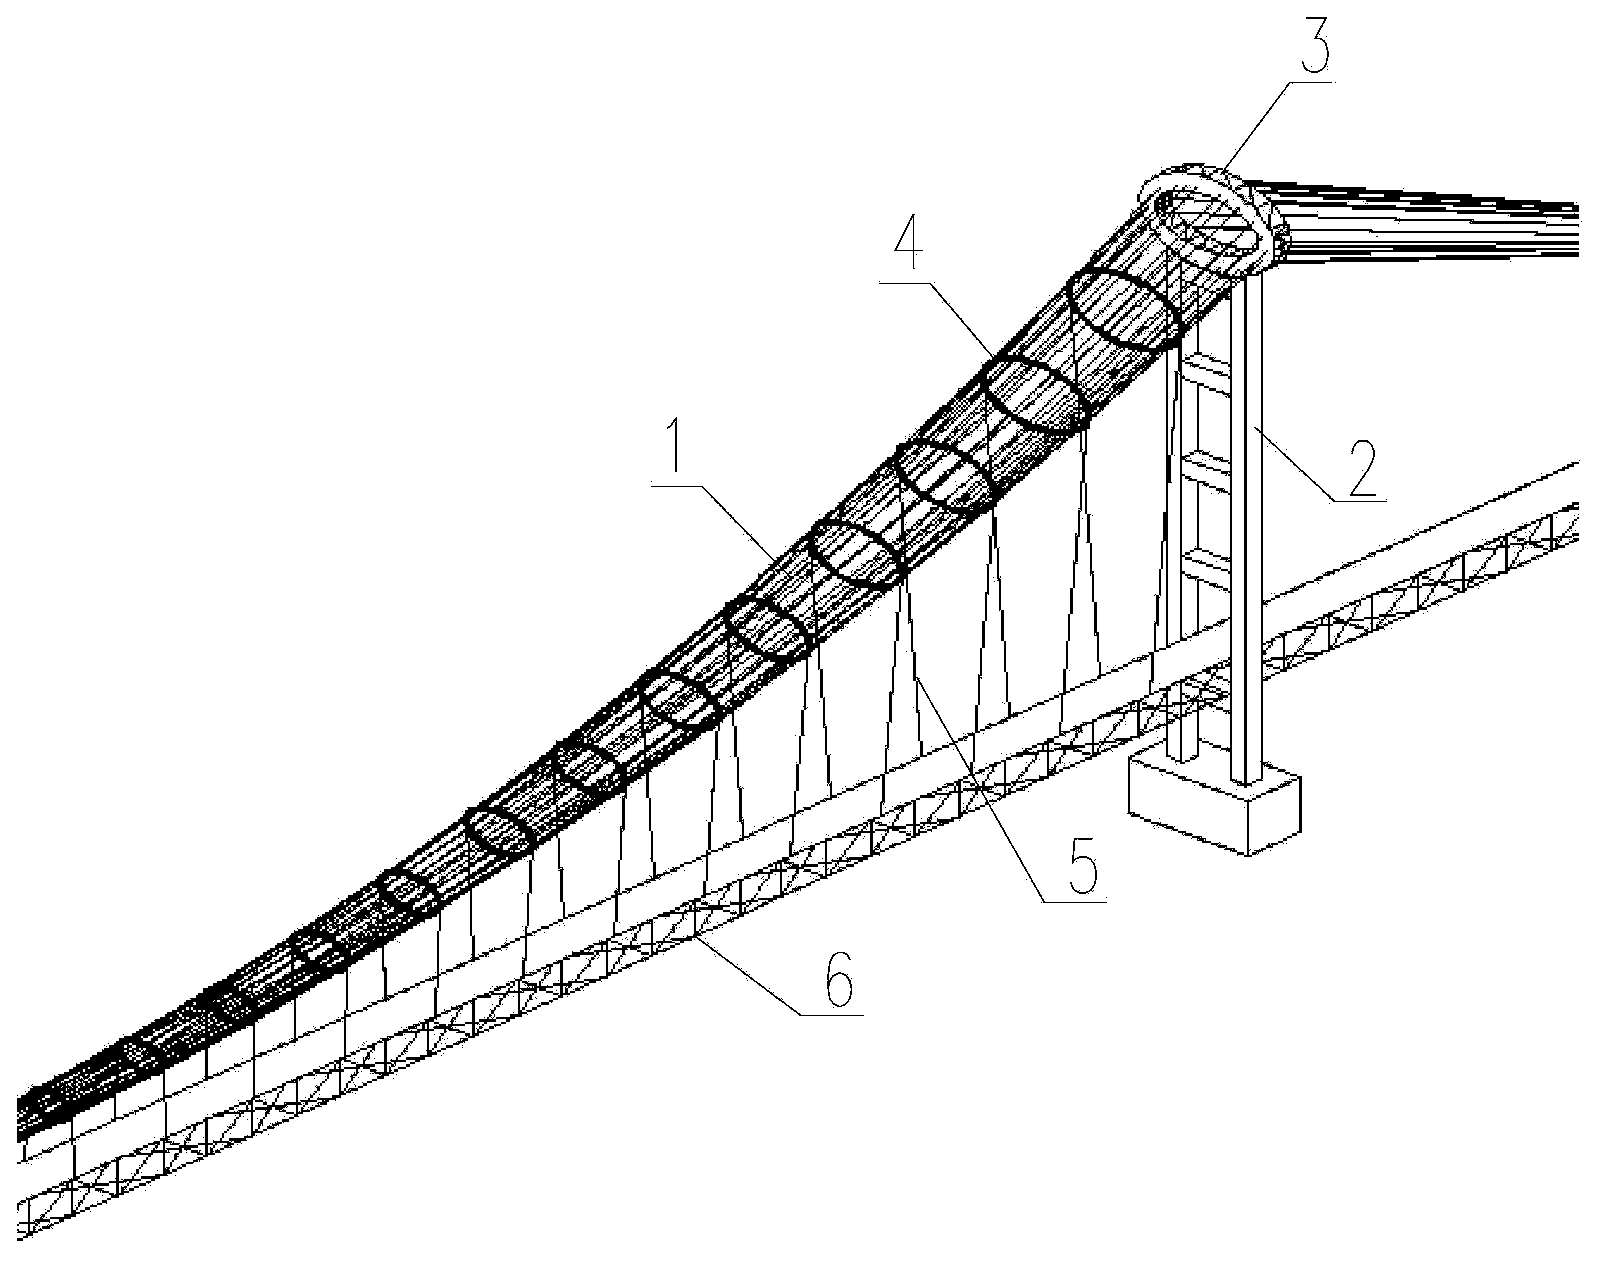 Extra-large-span suspension bridge with single-leaf hyperboloid space cable network main cable and its construction method